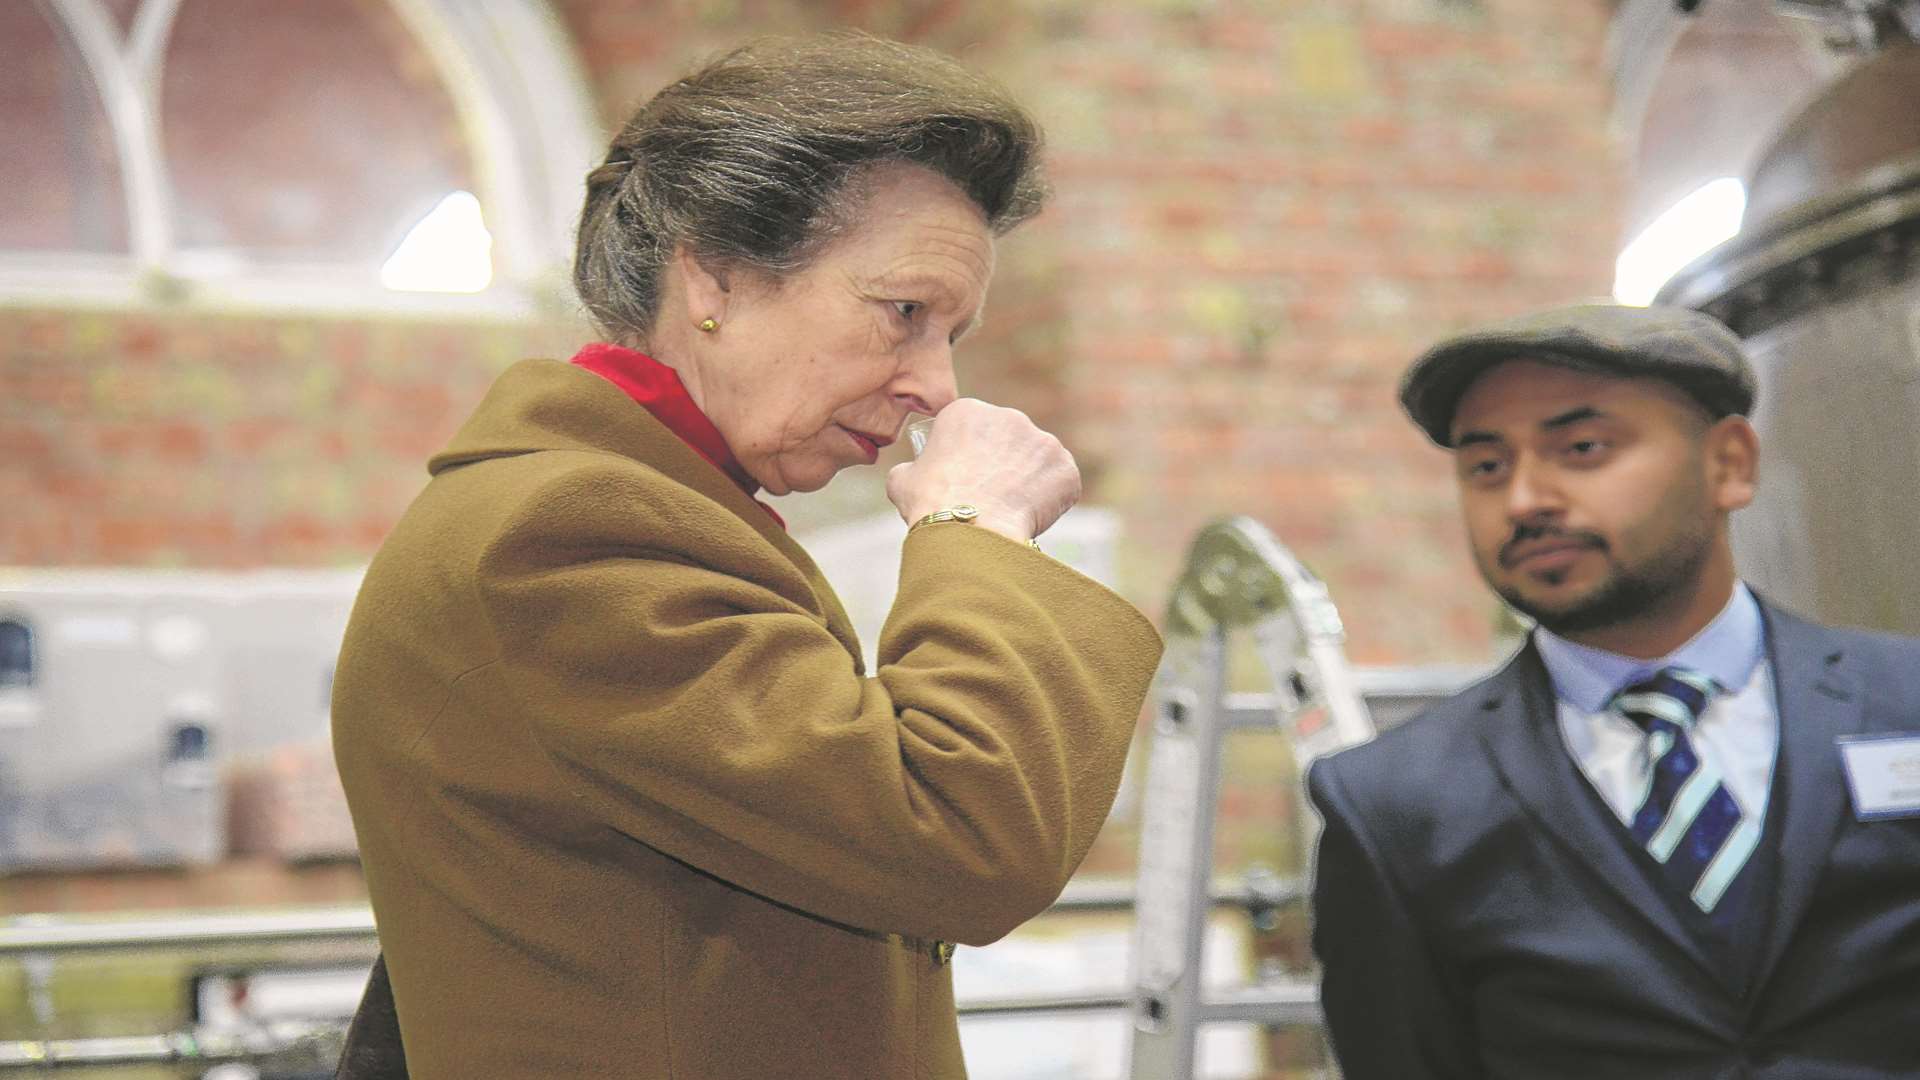 Princess Anne sampling the whiskey during her grand tour. Credit: Gary Browne